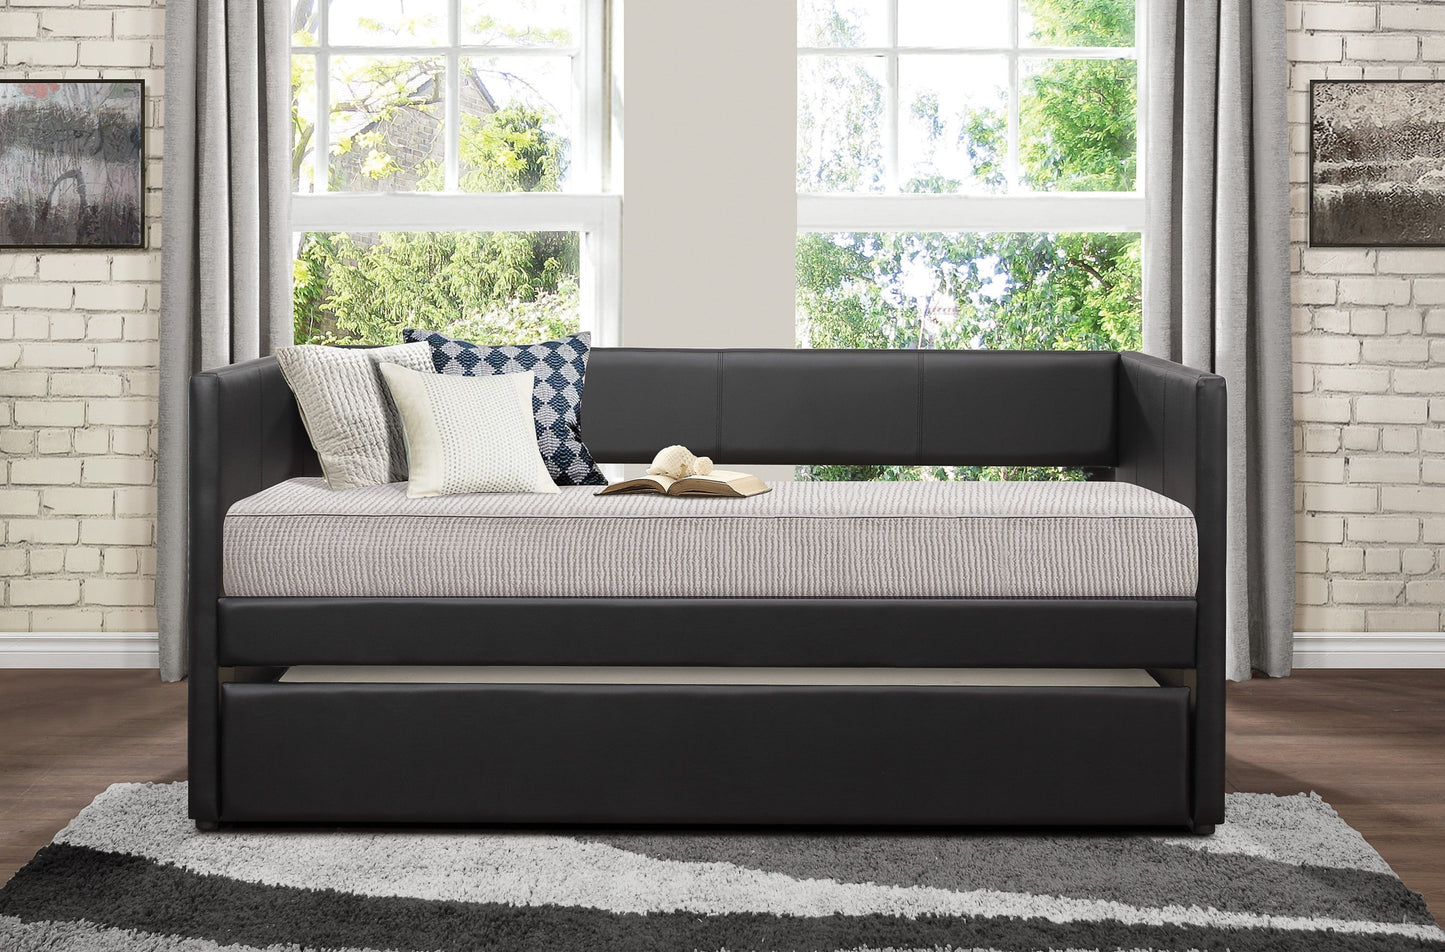 Adra Dark Brown Daybed with Trundle